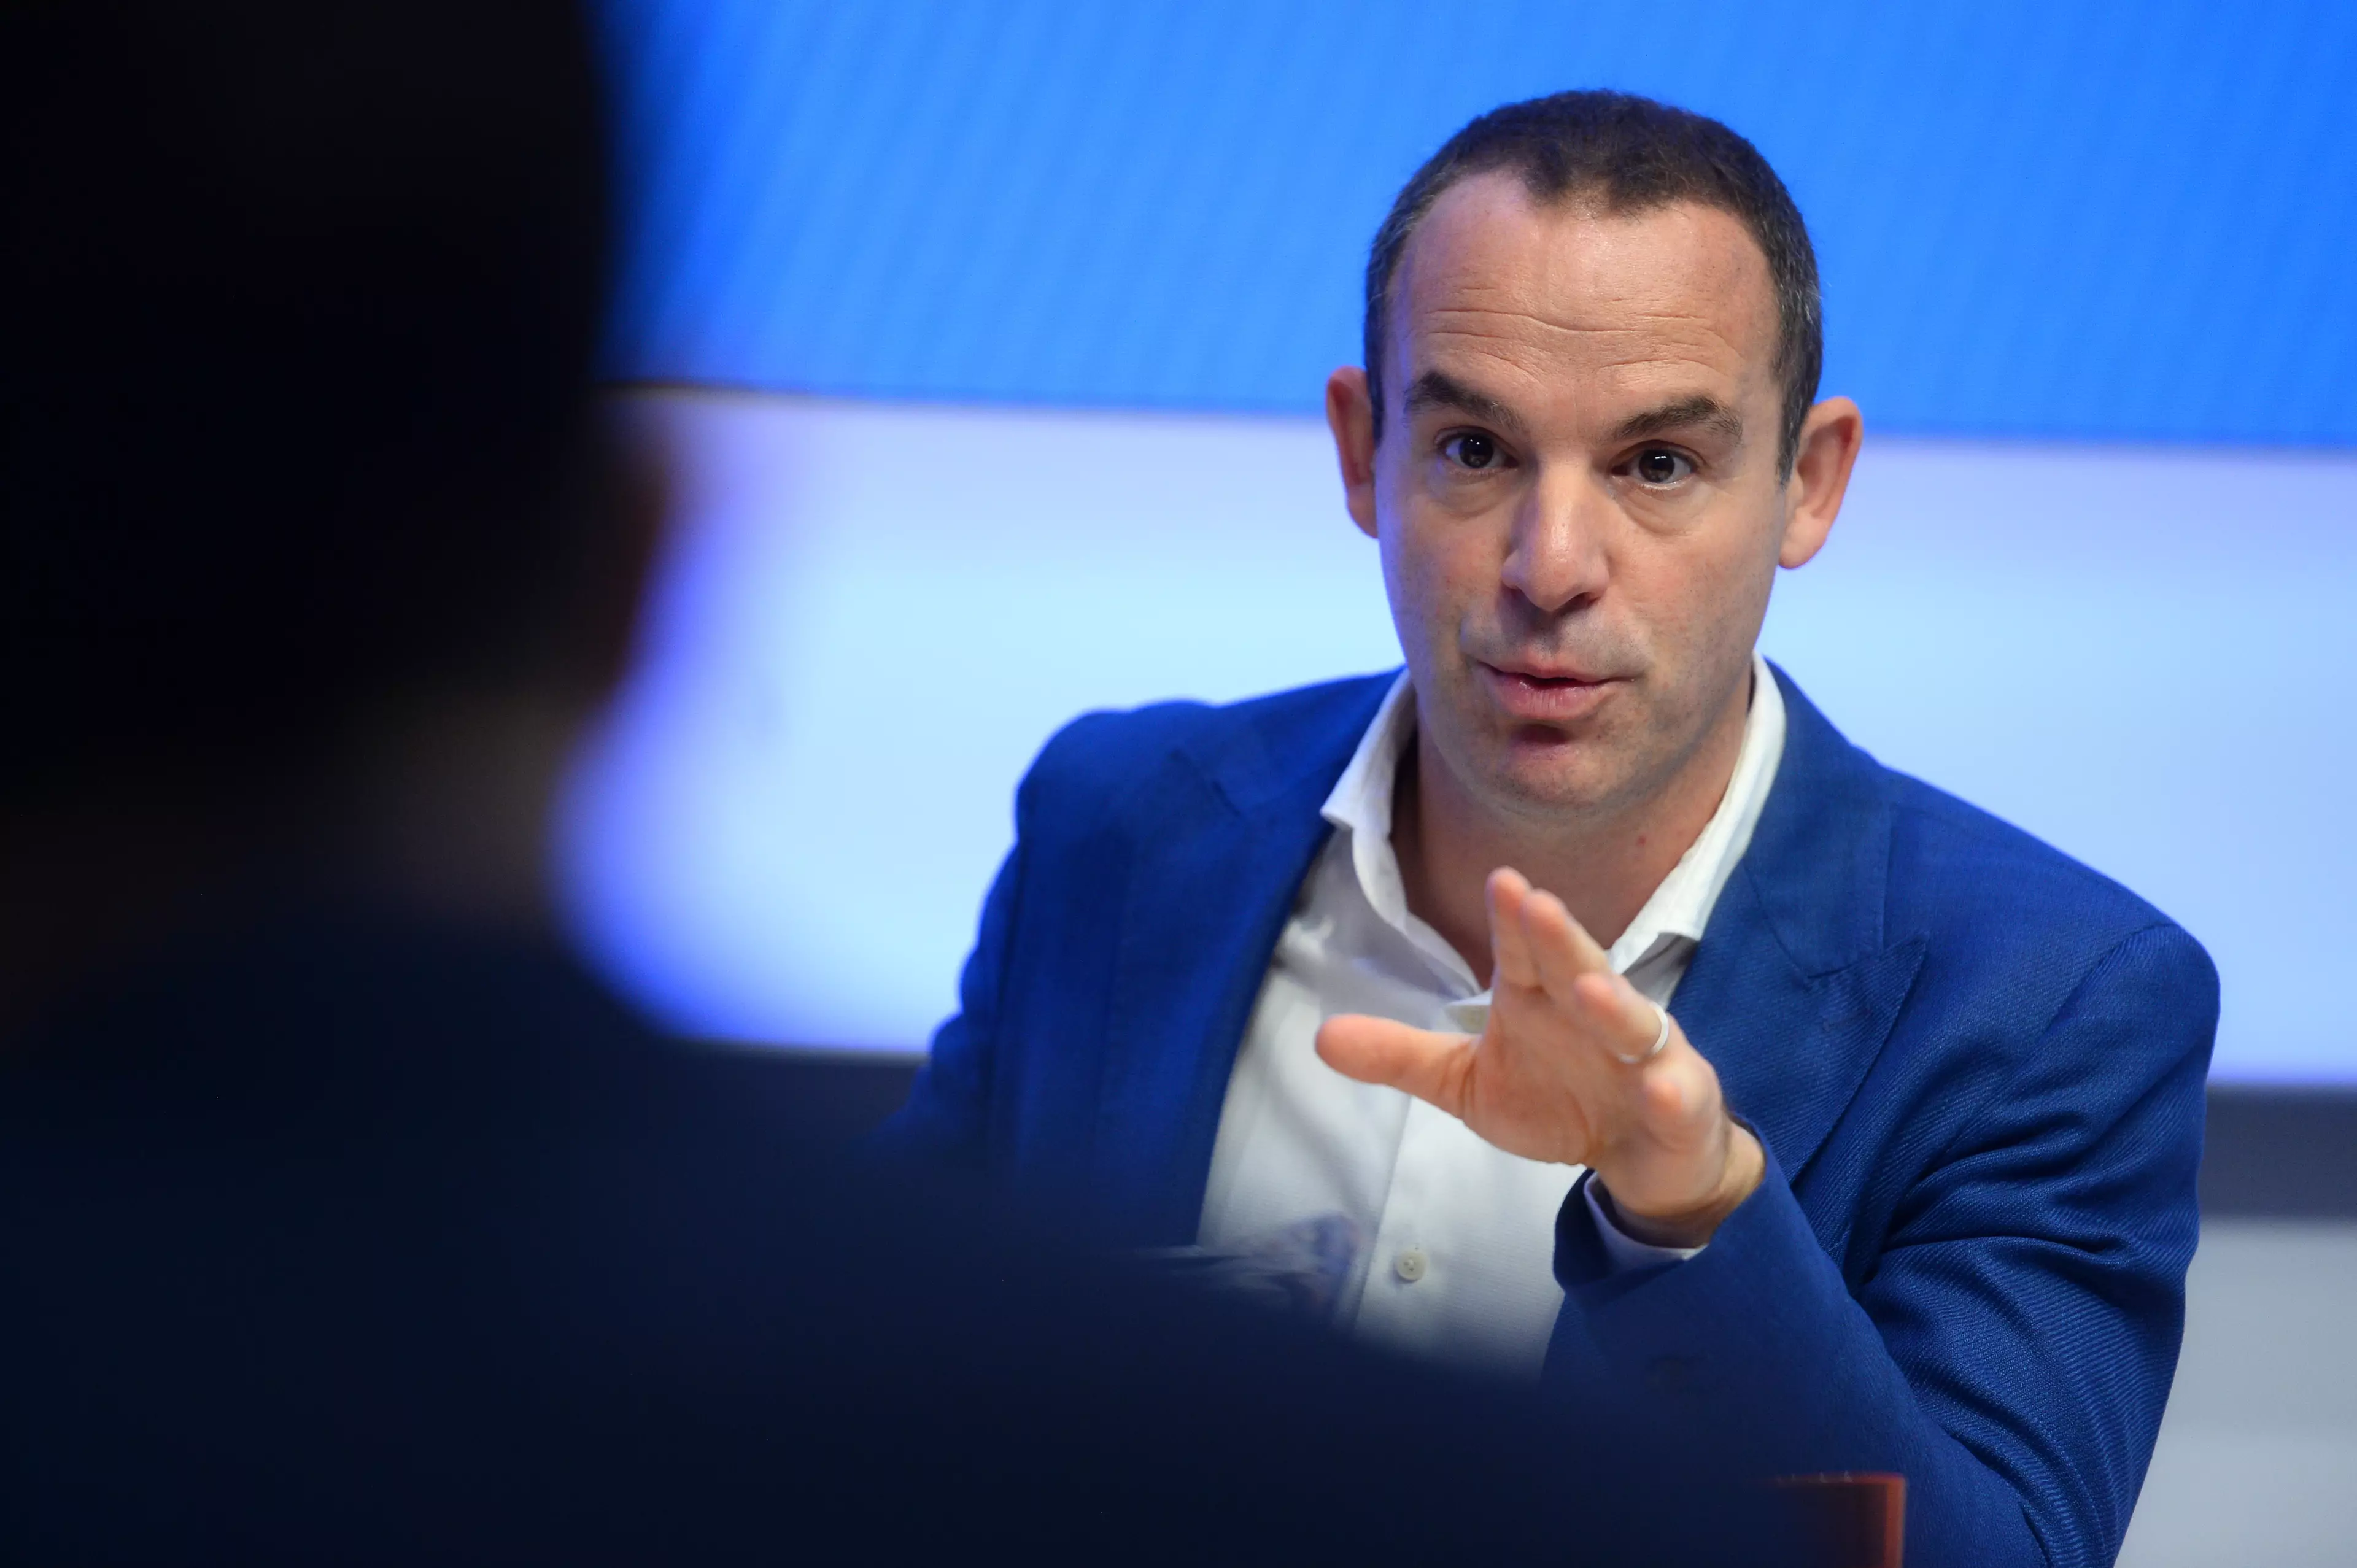 Martin Lewis is the founder of Money Saving expert. (